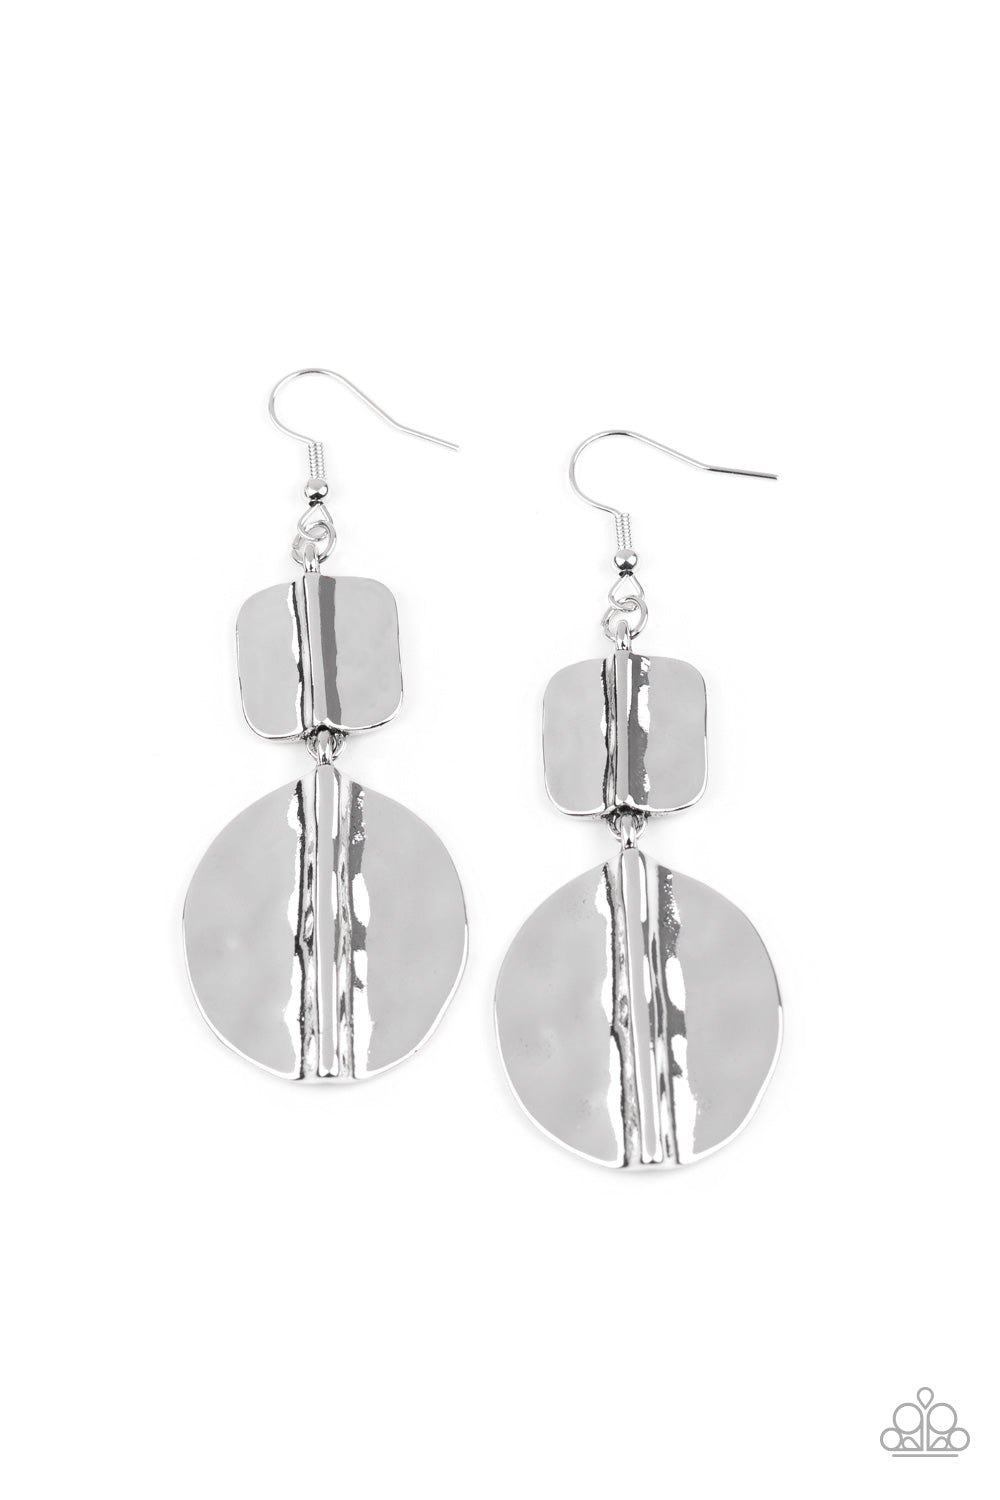 silver, silver jewelry,earrings, fish hook, hammered texture, affordable jewlery, affordable holiday gift, everyday jewelry, trending jewelry, viral jewelry, paparazzi accessories, jewlery stores prom jewelry, wedding jewelry, jewelry stores near me, 